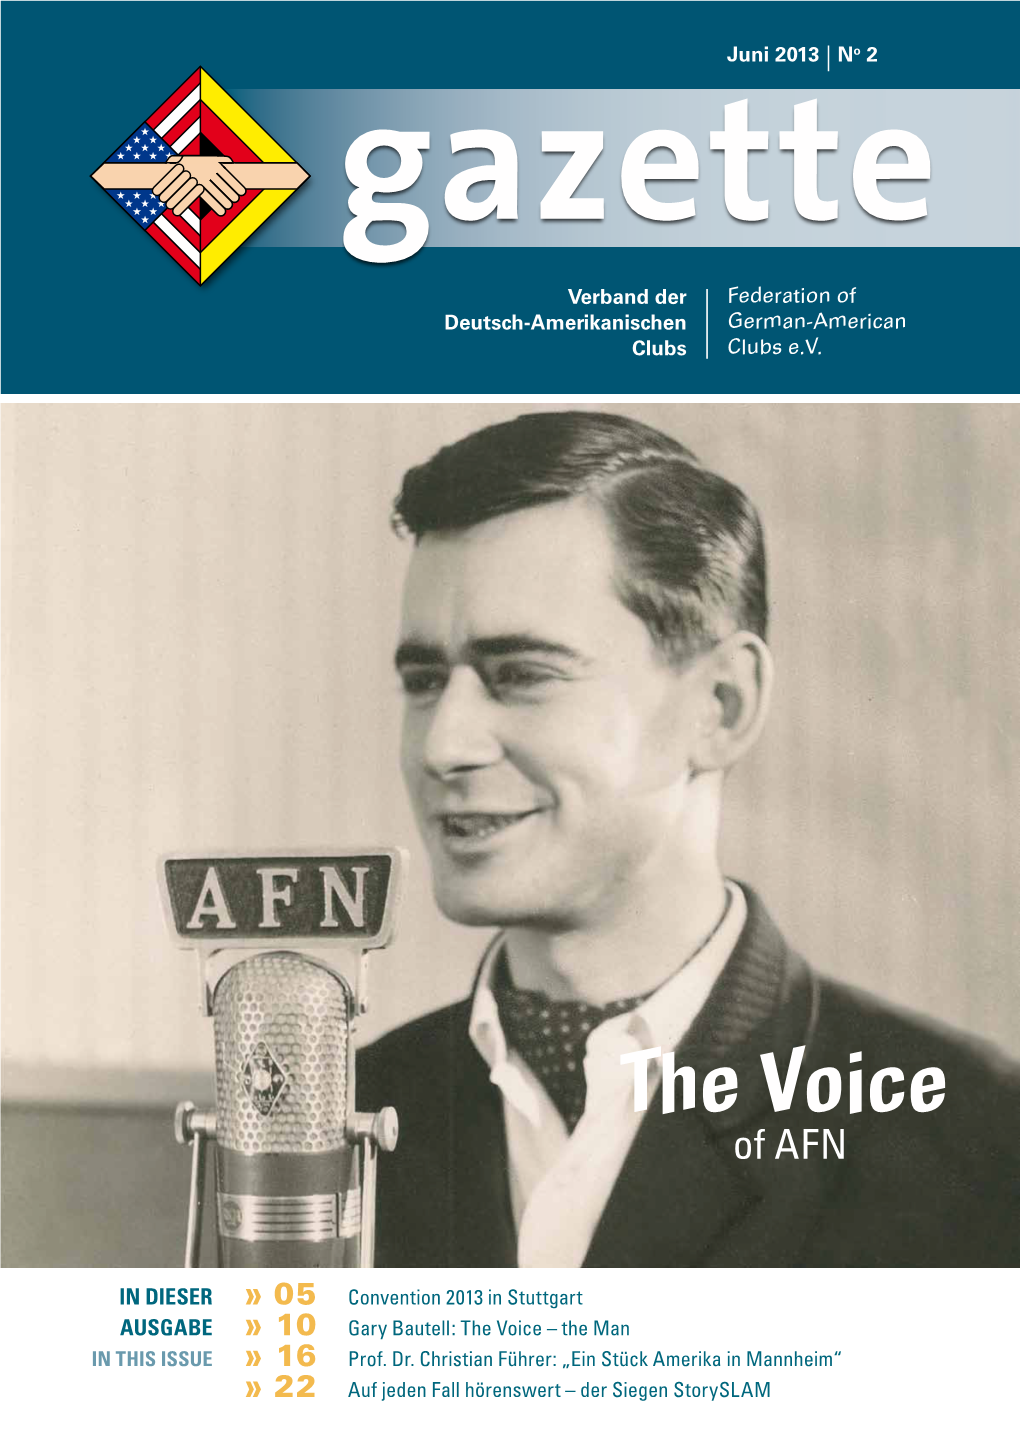 The Voice of AFN